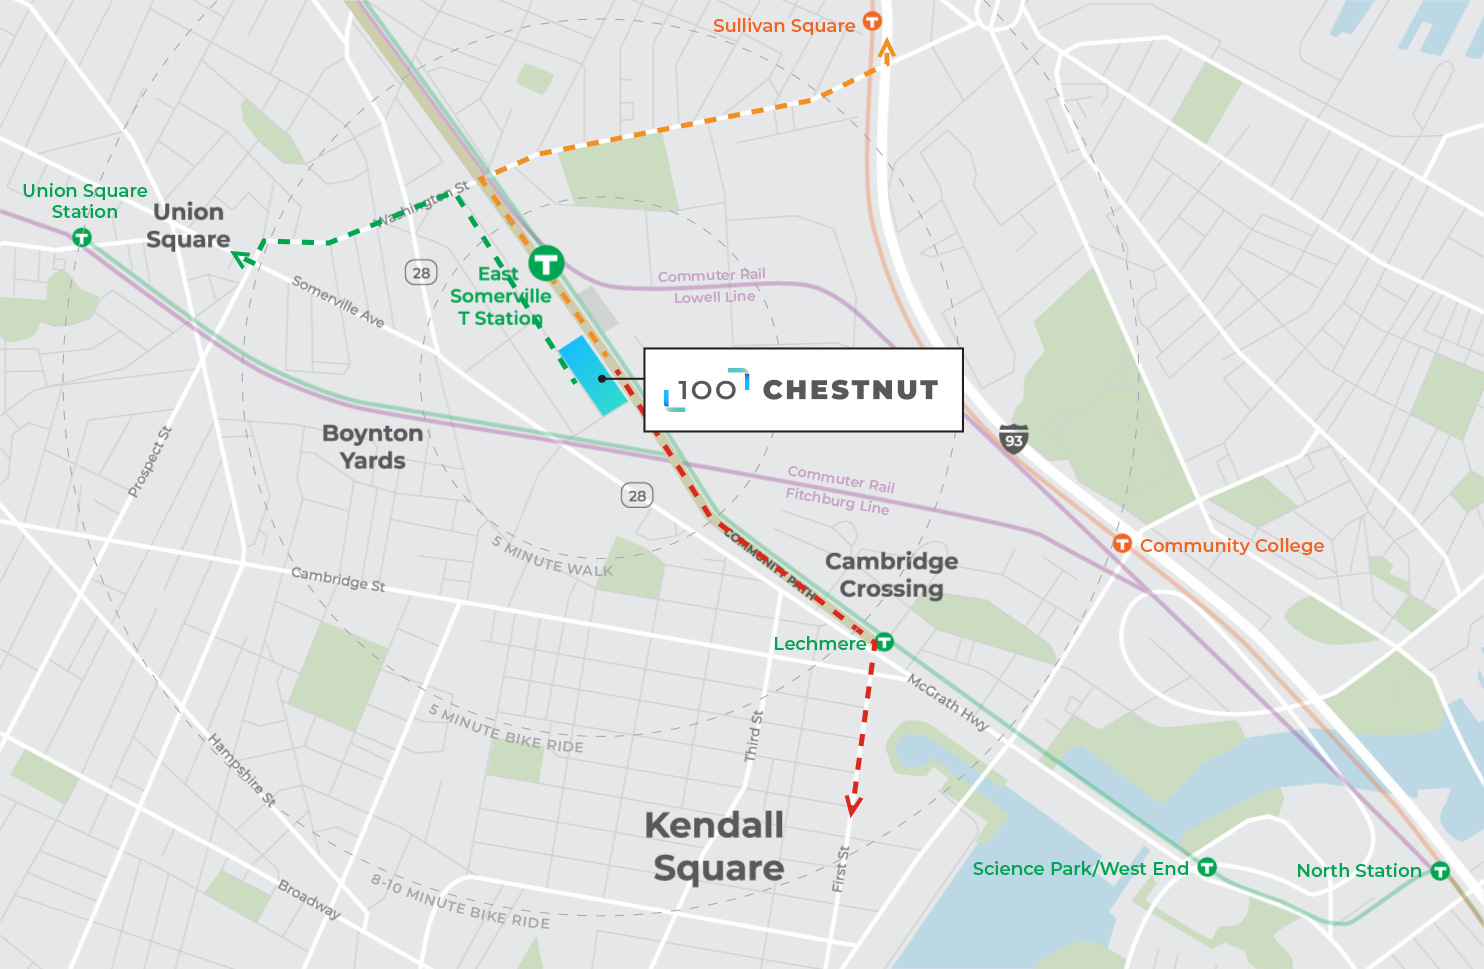 A map of the area around 100 Chesnut showing transit lines and routes to nearby MBTA stations.